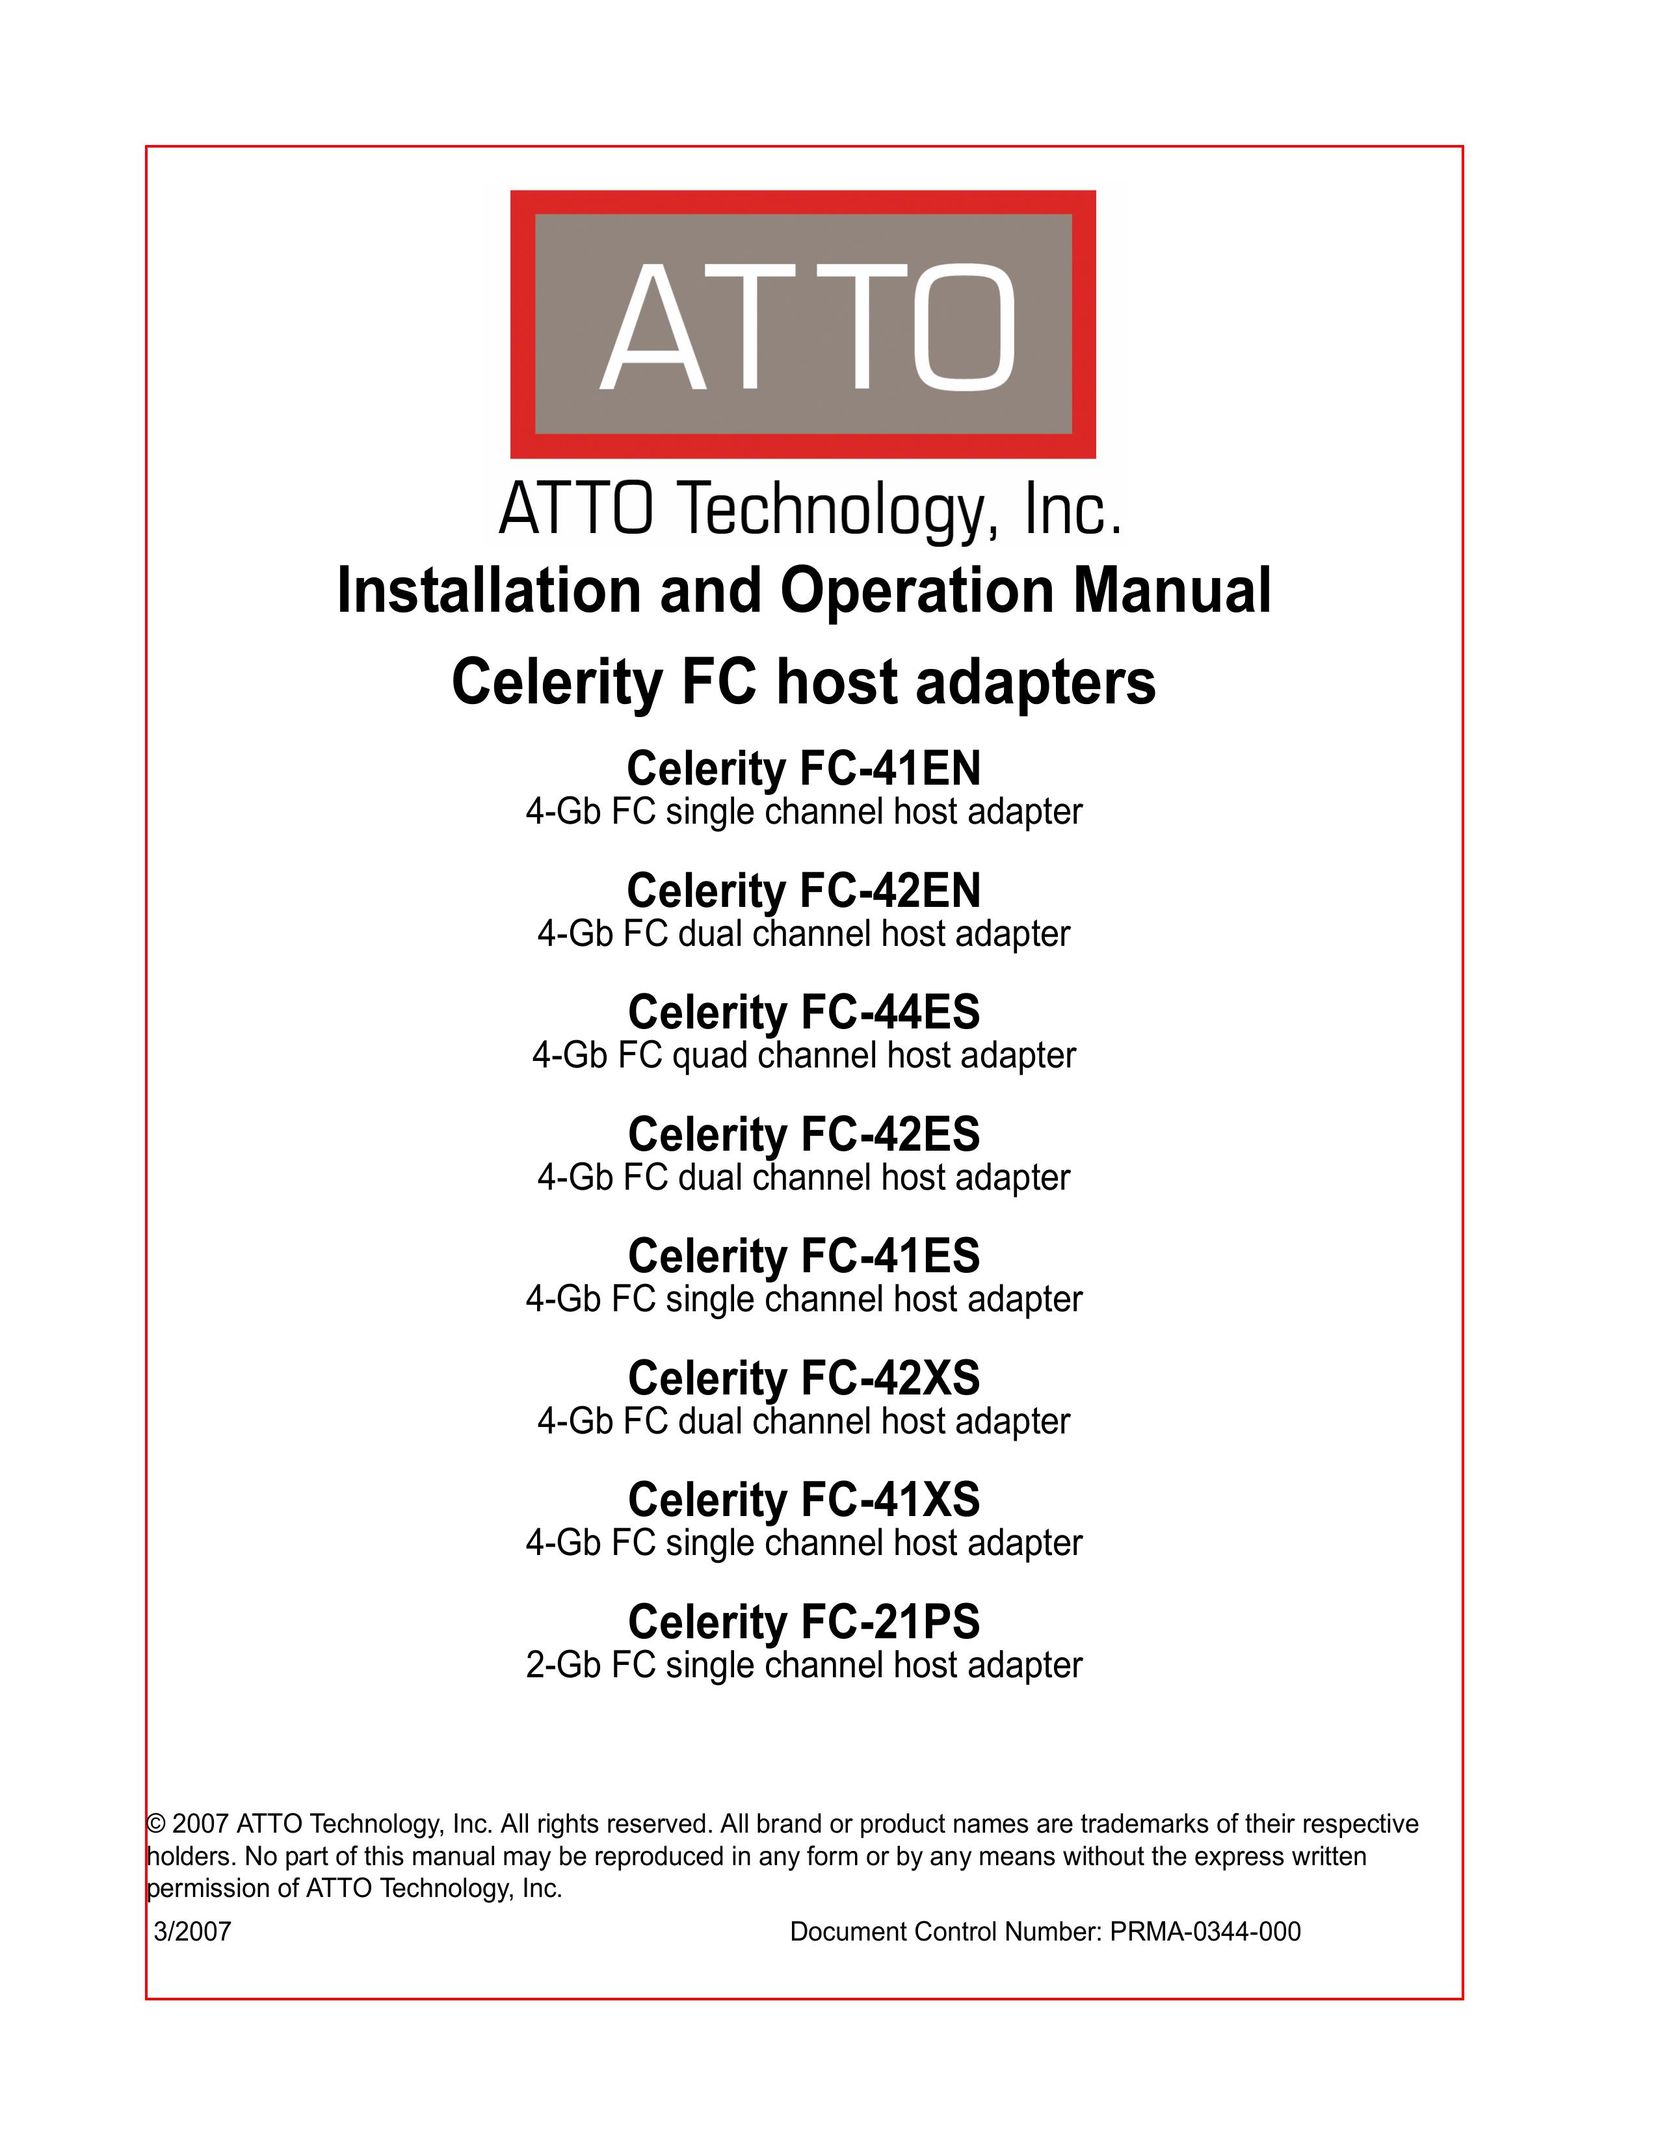 ATTO Technology FC-21PS Computer Hardware User Manual